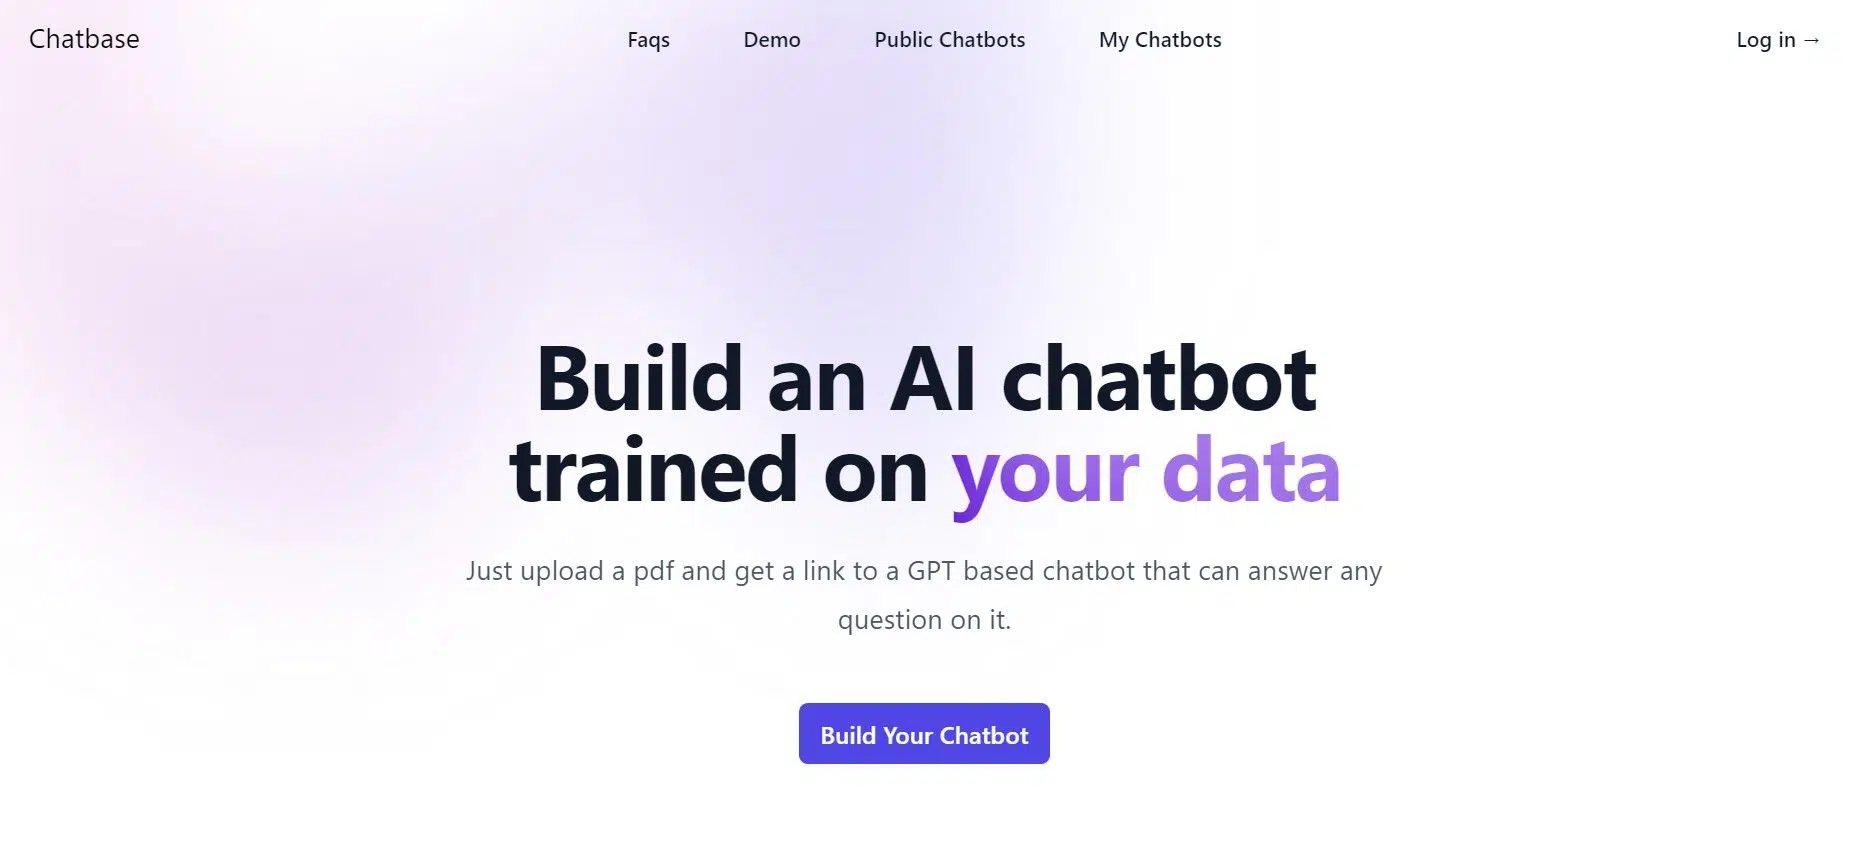 Chatbasewebsite picture